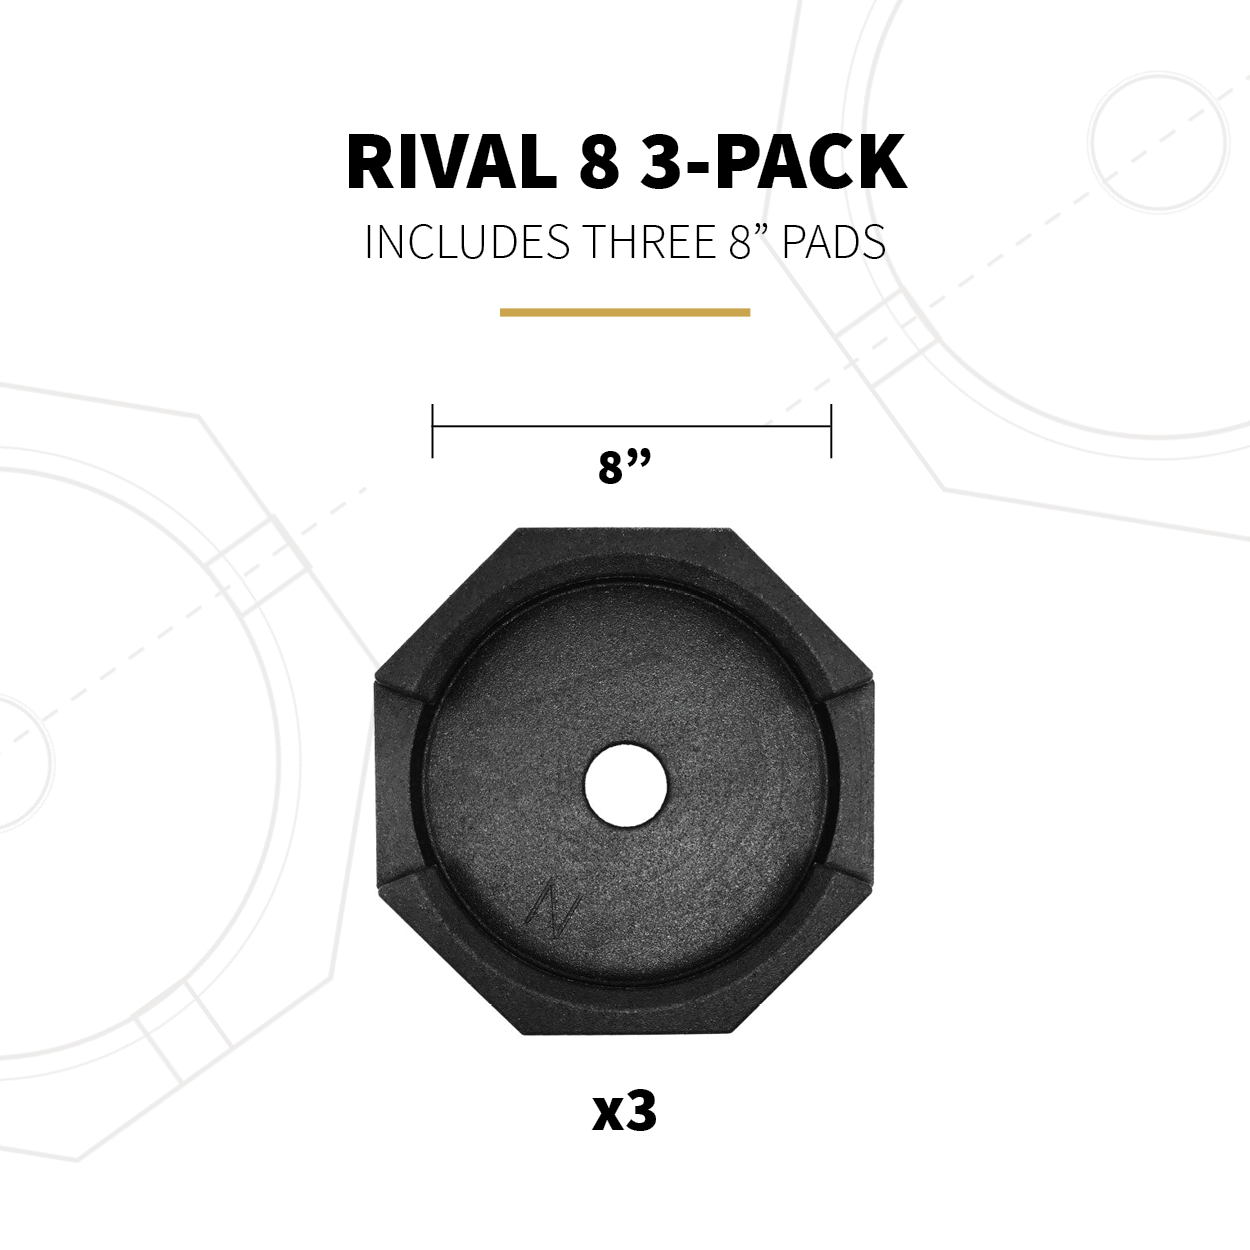 Rival 8 3-Pack Specs